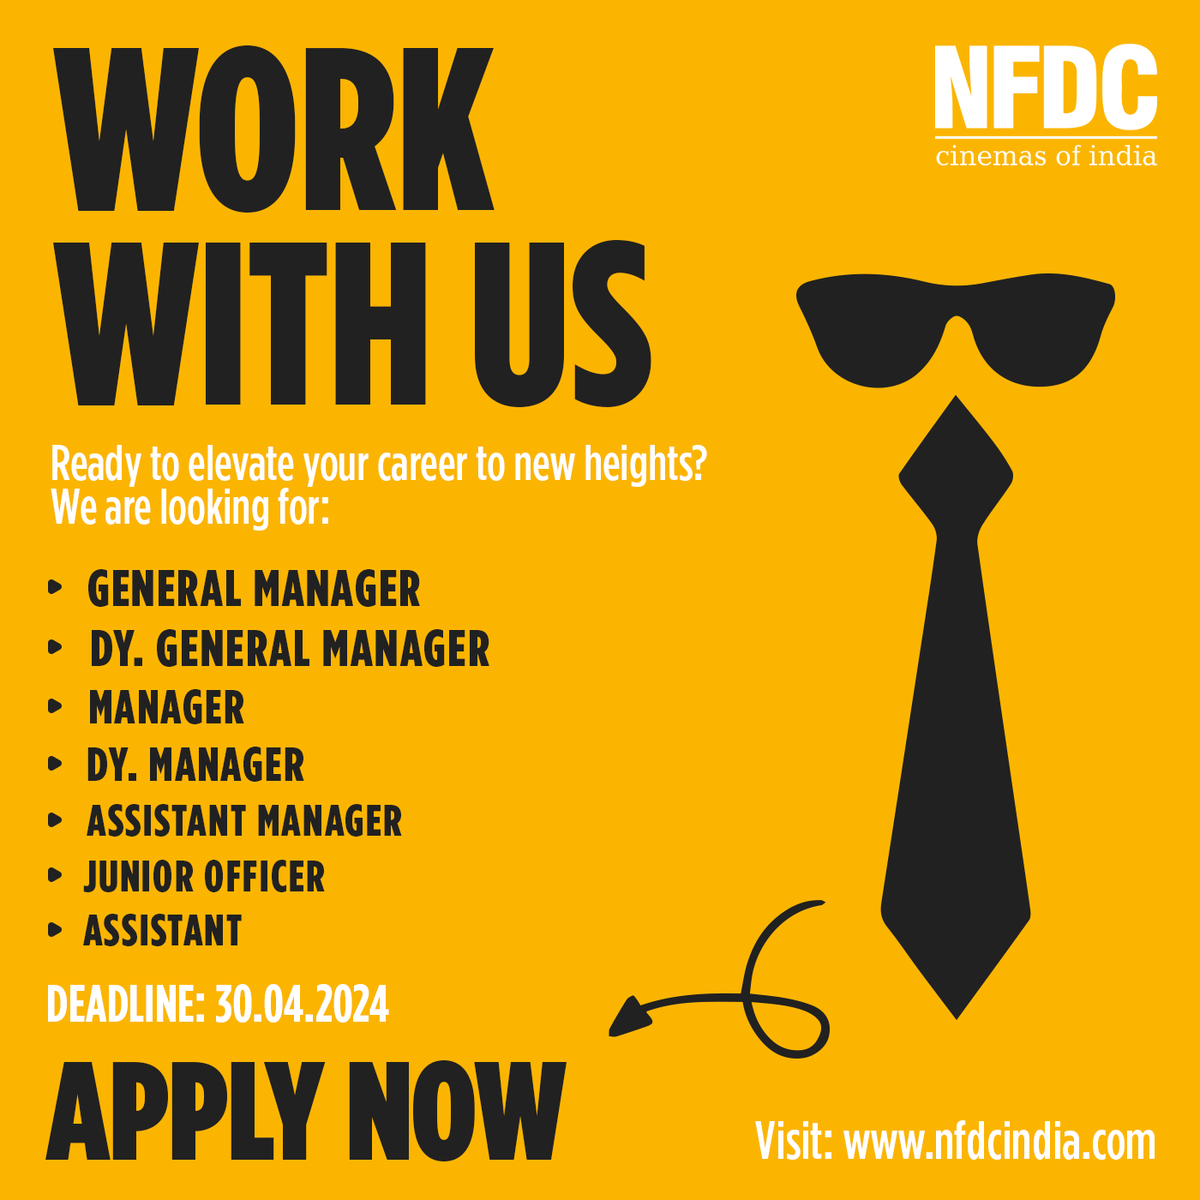 Elevate your career and soar to new heights with us! Join our team and explore exciting career opportunities. 

Apply by April 30th at nfdcindia.com 

#CareerOpportunity #JoinUs